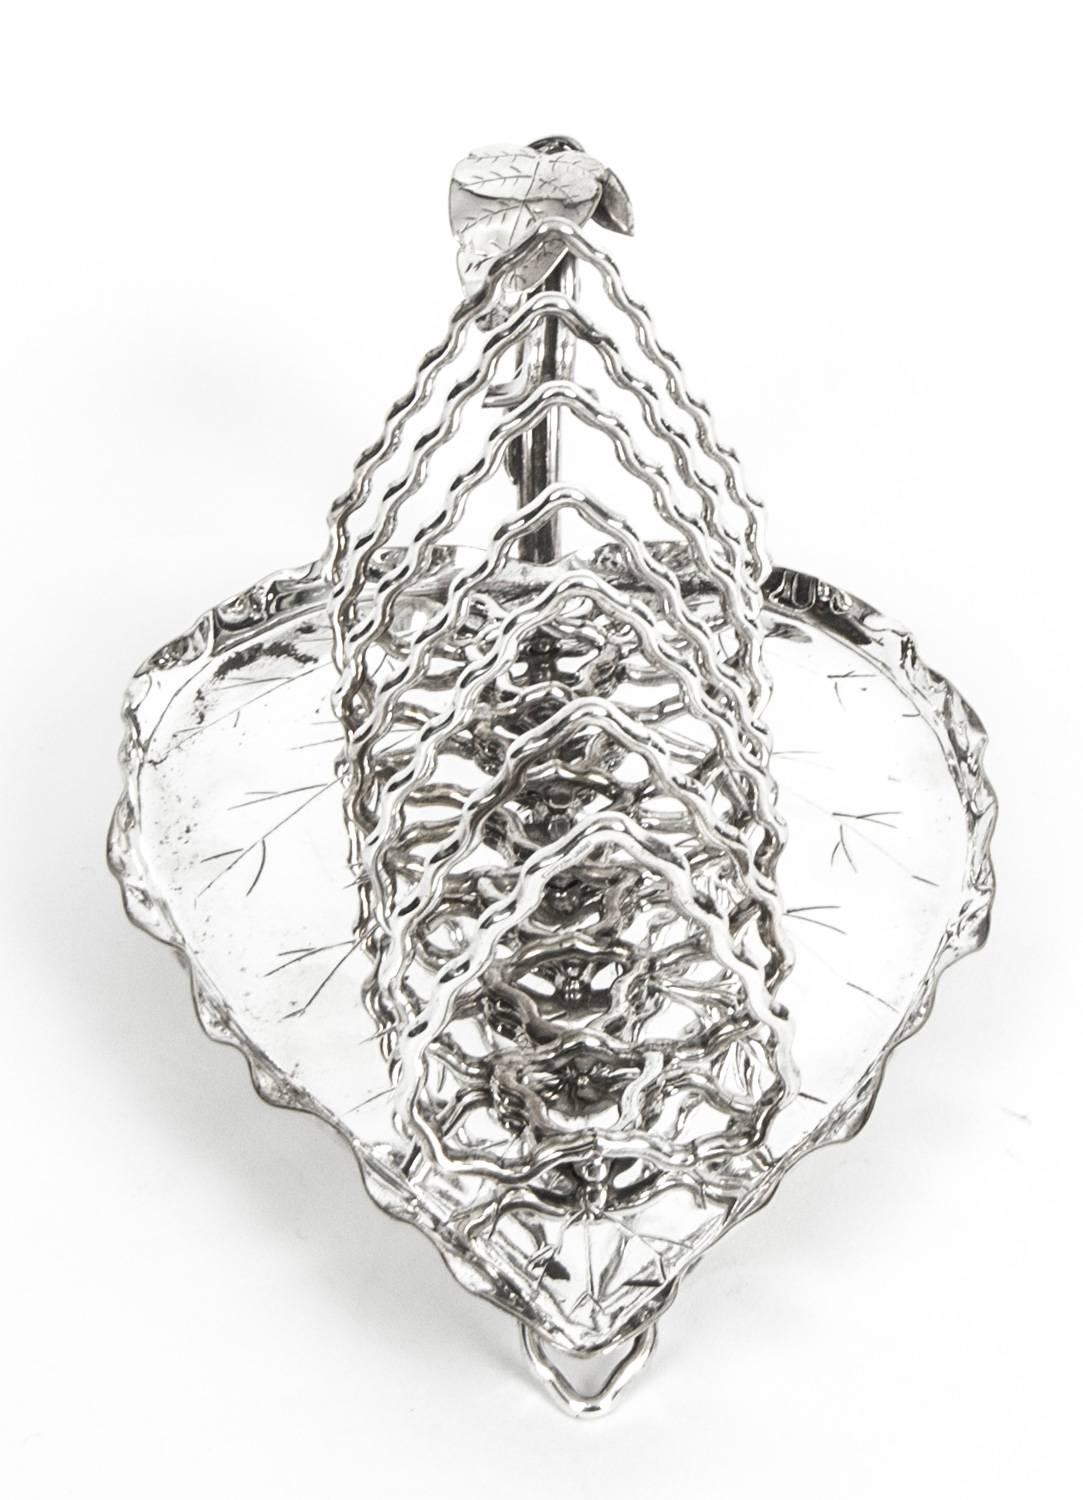 This is a lovely antique Victorian silver plated toast rack circa 1870 in date.

With the makers mark H & H for Hukin & Heath, the firm is well known for its production in the 1870s and 1880s of silver and electroplated wares under the guidance of